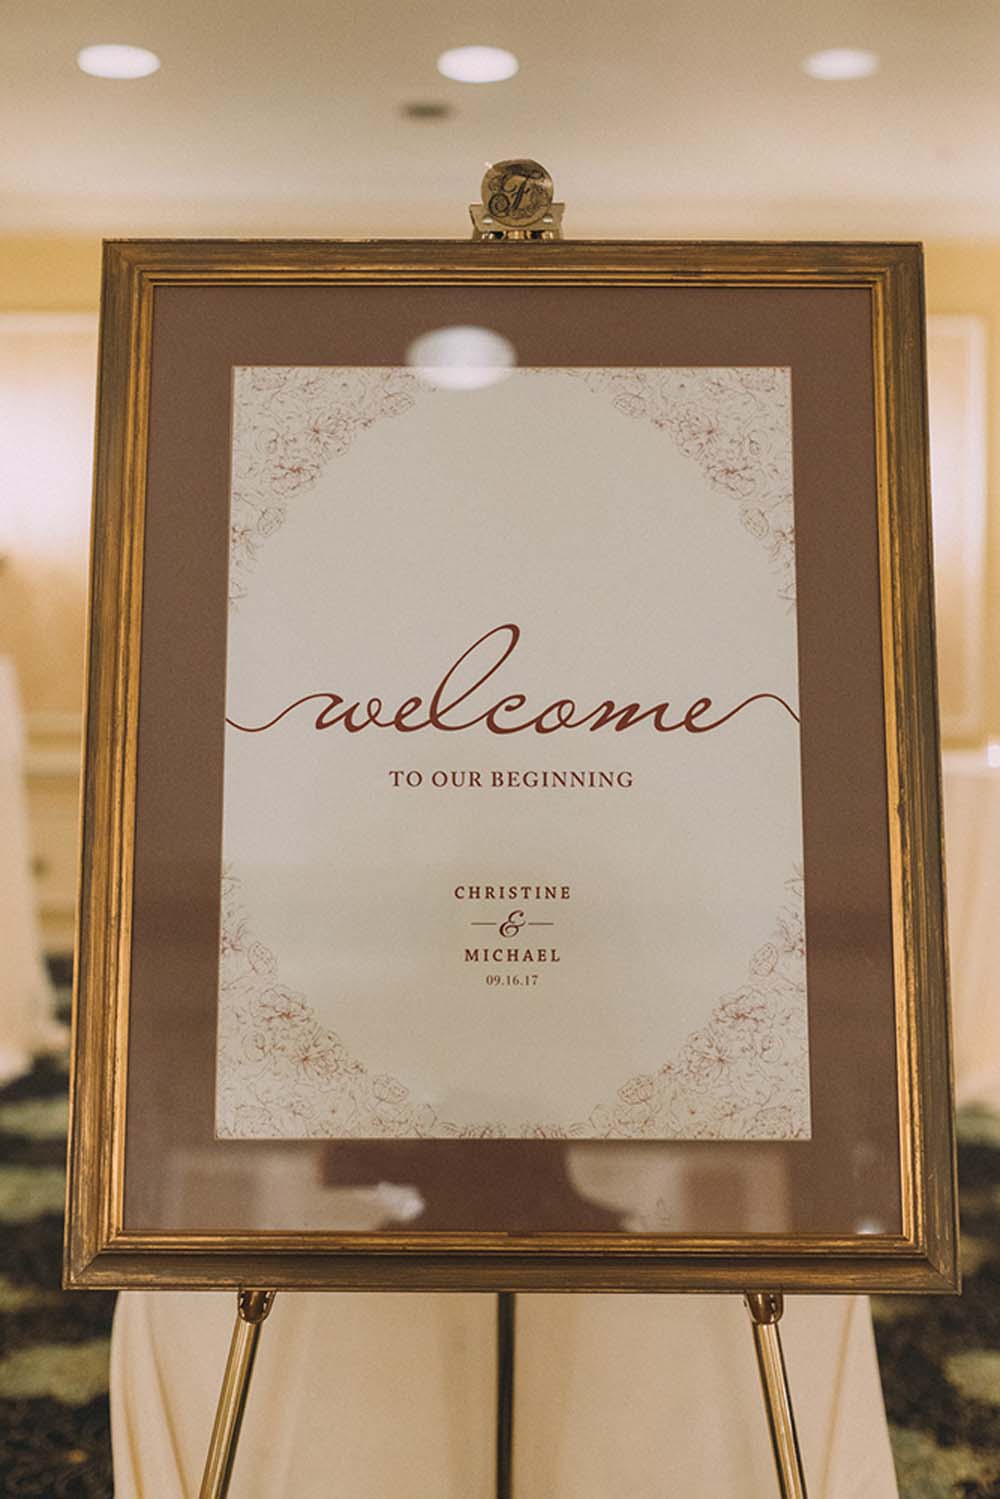 An Elegant Wedding with Cultural Elements - Welcome sign